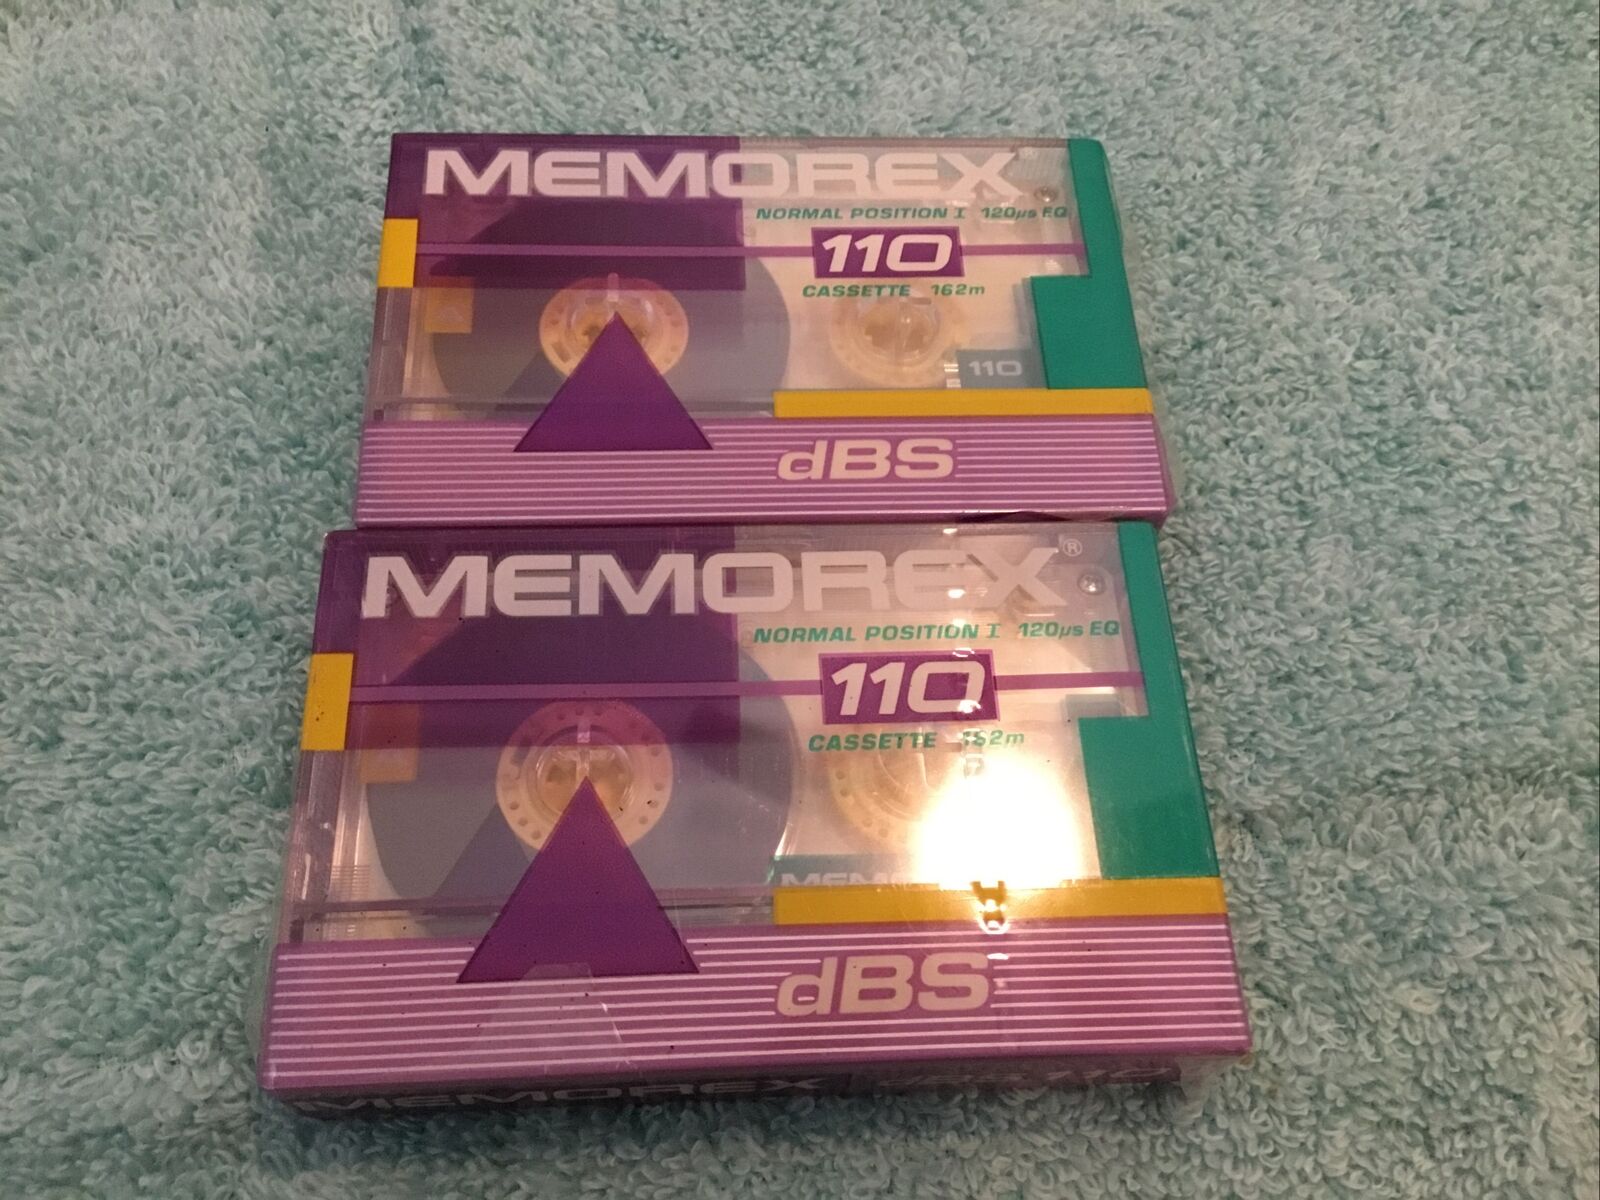 Memorex Dbs 110 Vintage Tape Cassettes New Factory Sealed - Lot Of 2 Ships Free